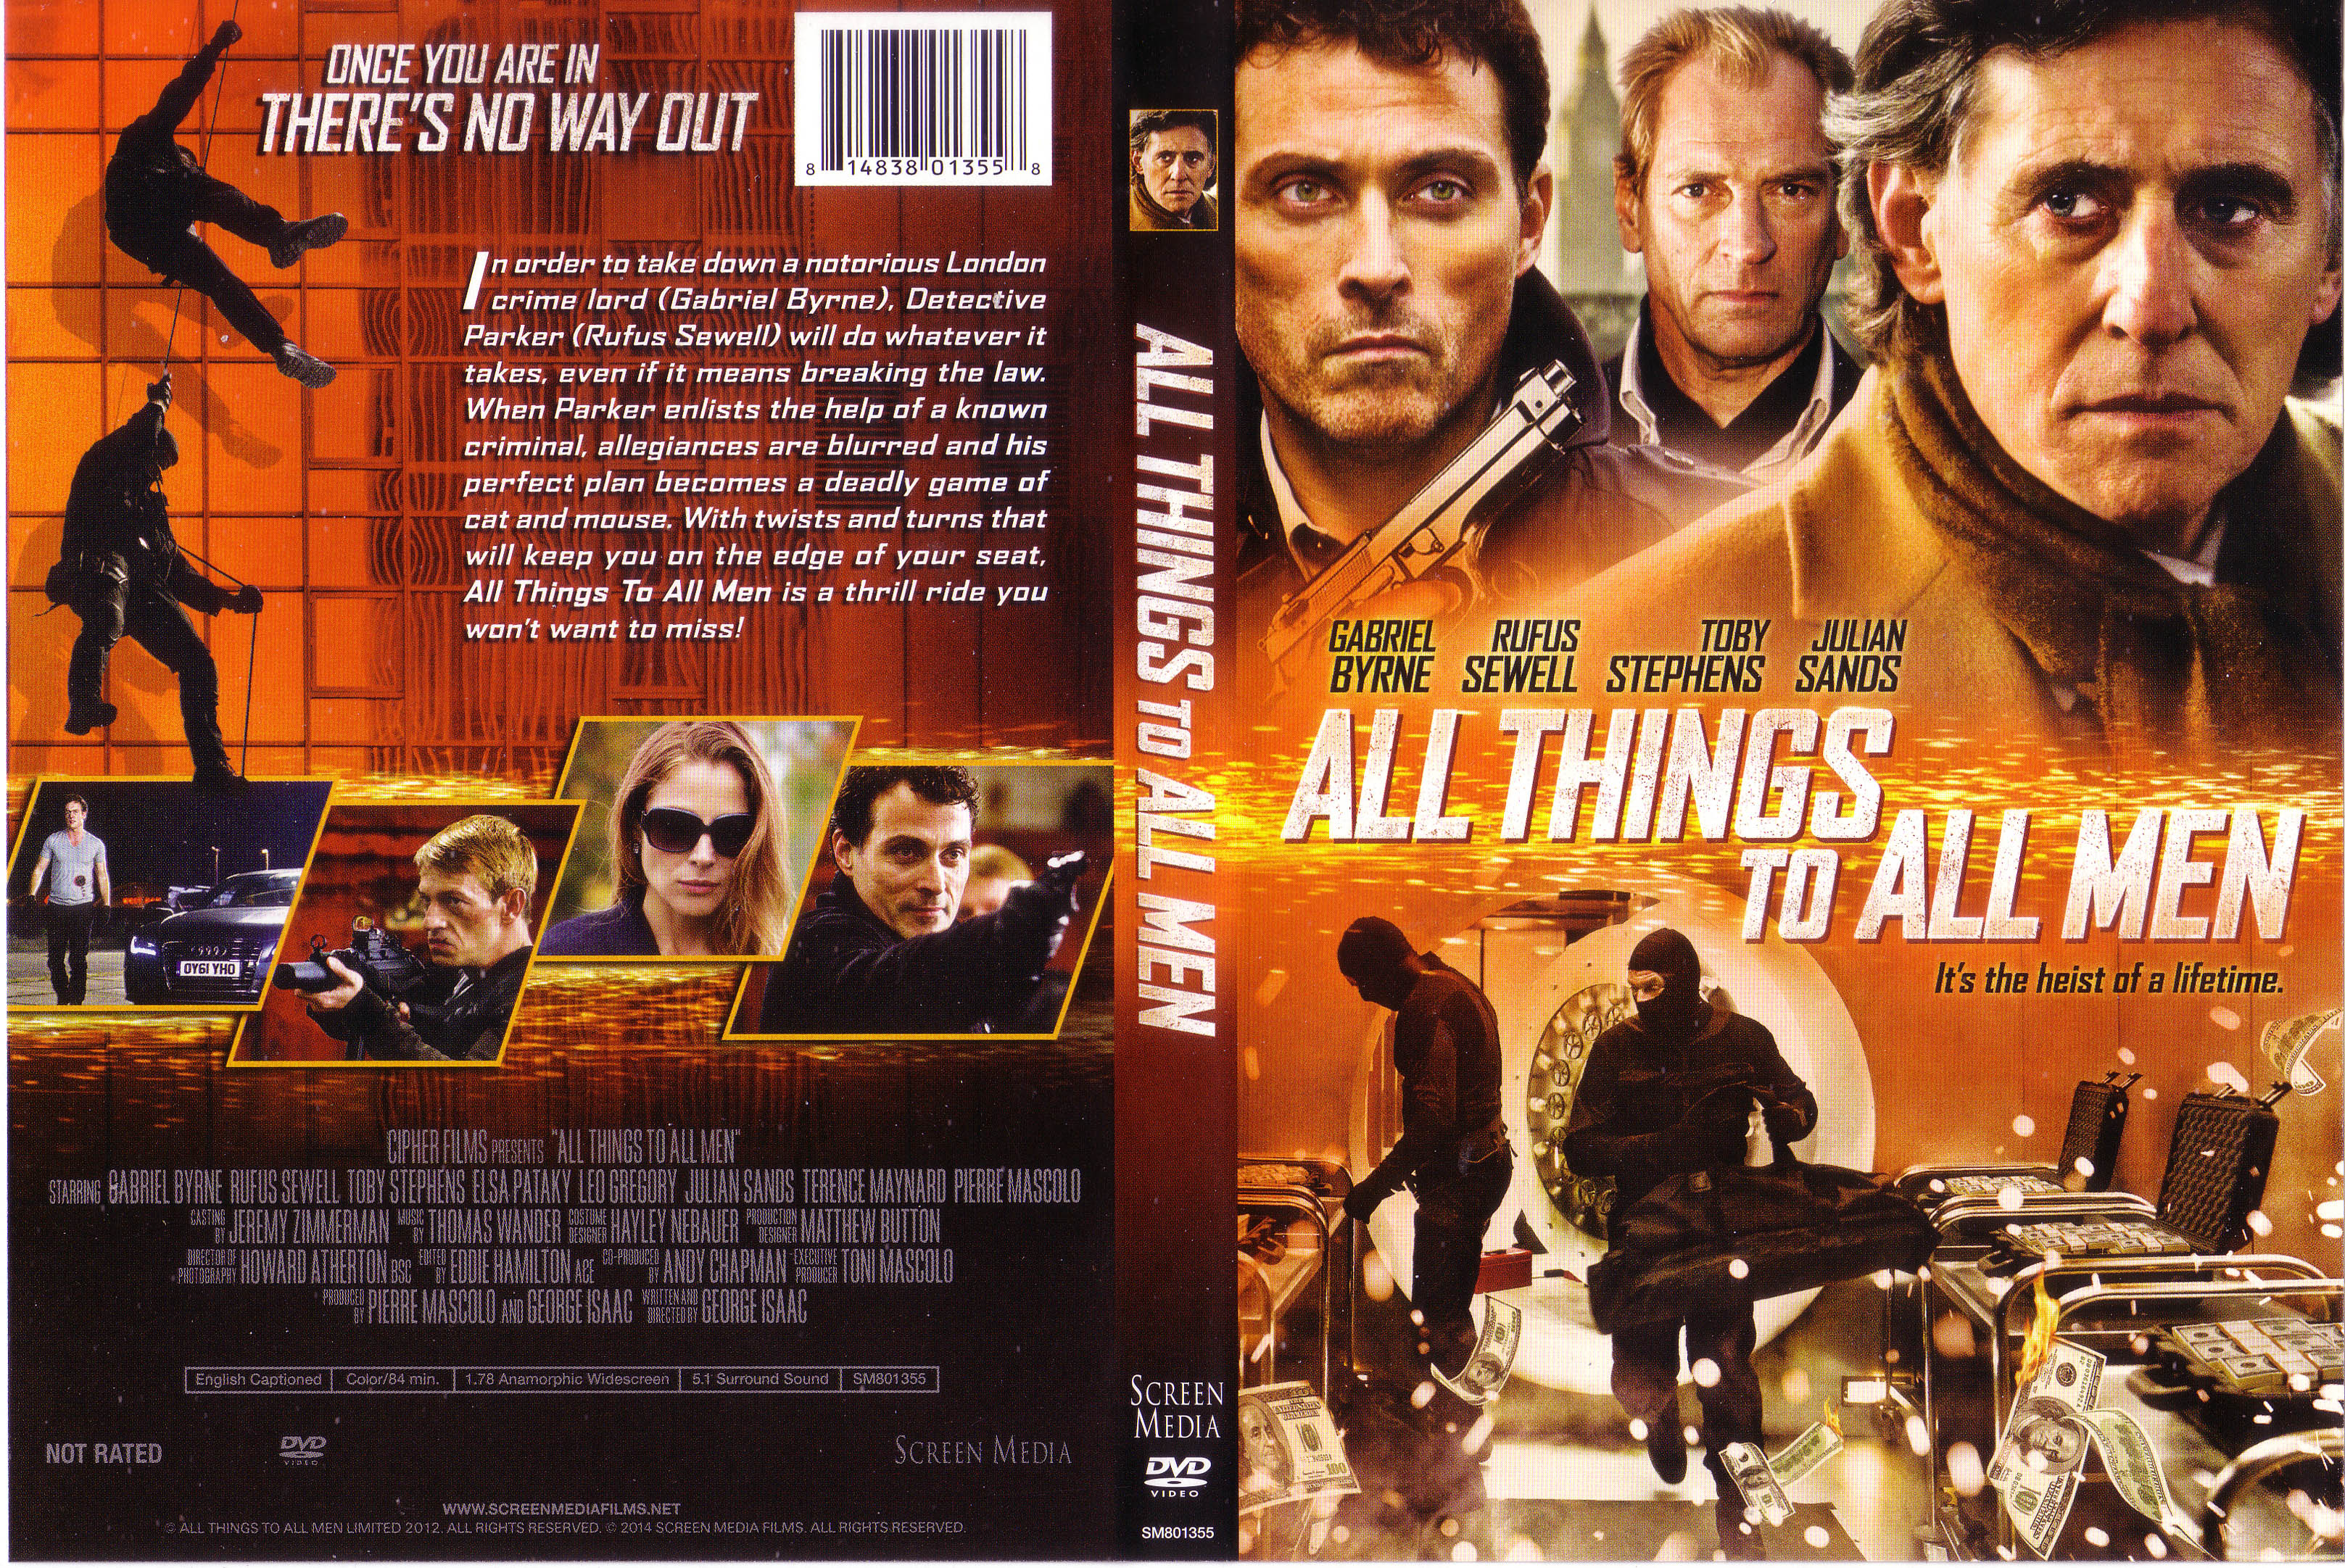 Jaquette DVD All things to all men - Deadly Game Zone 1